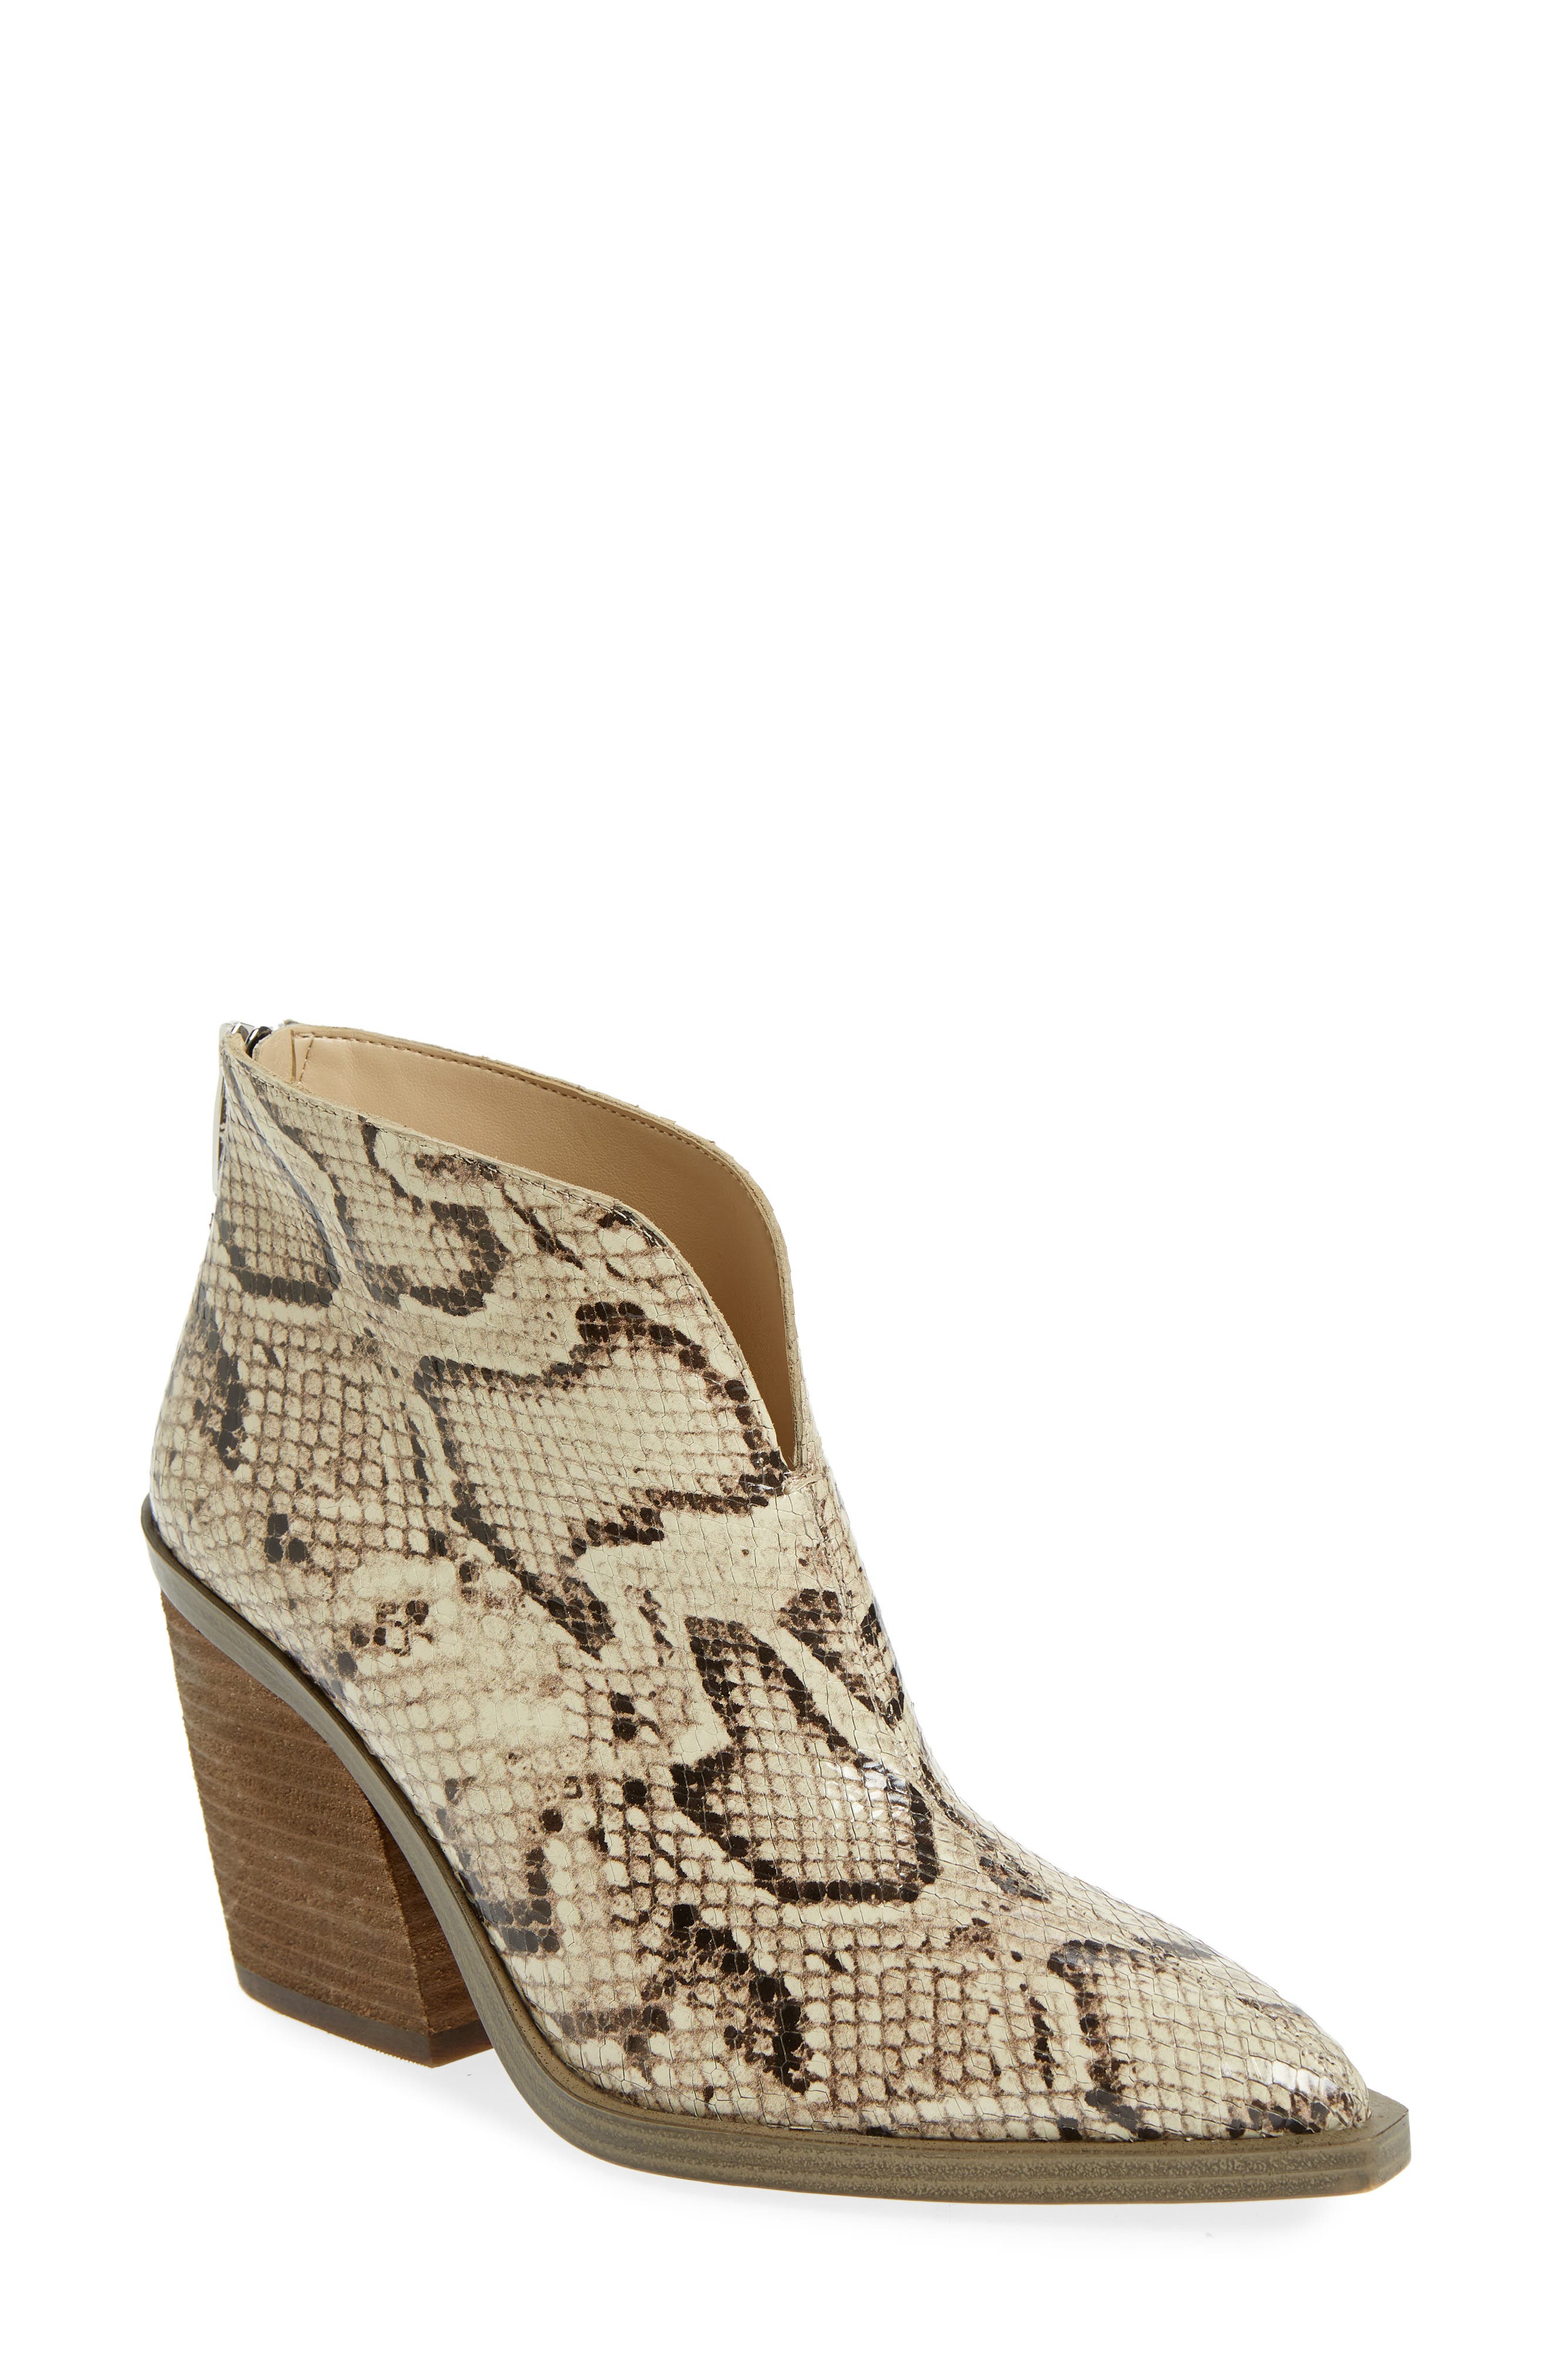 vince camuto shoes on sale